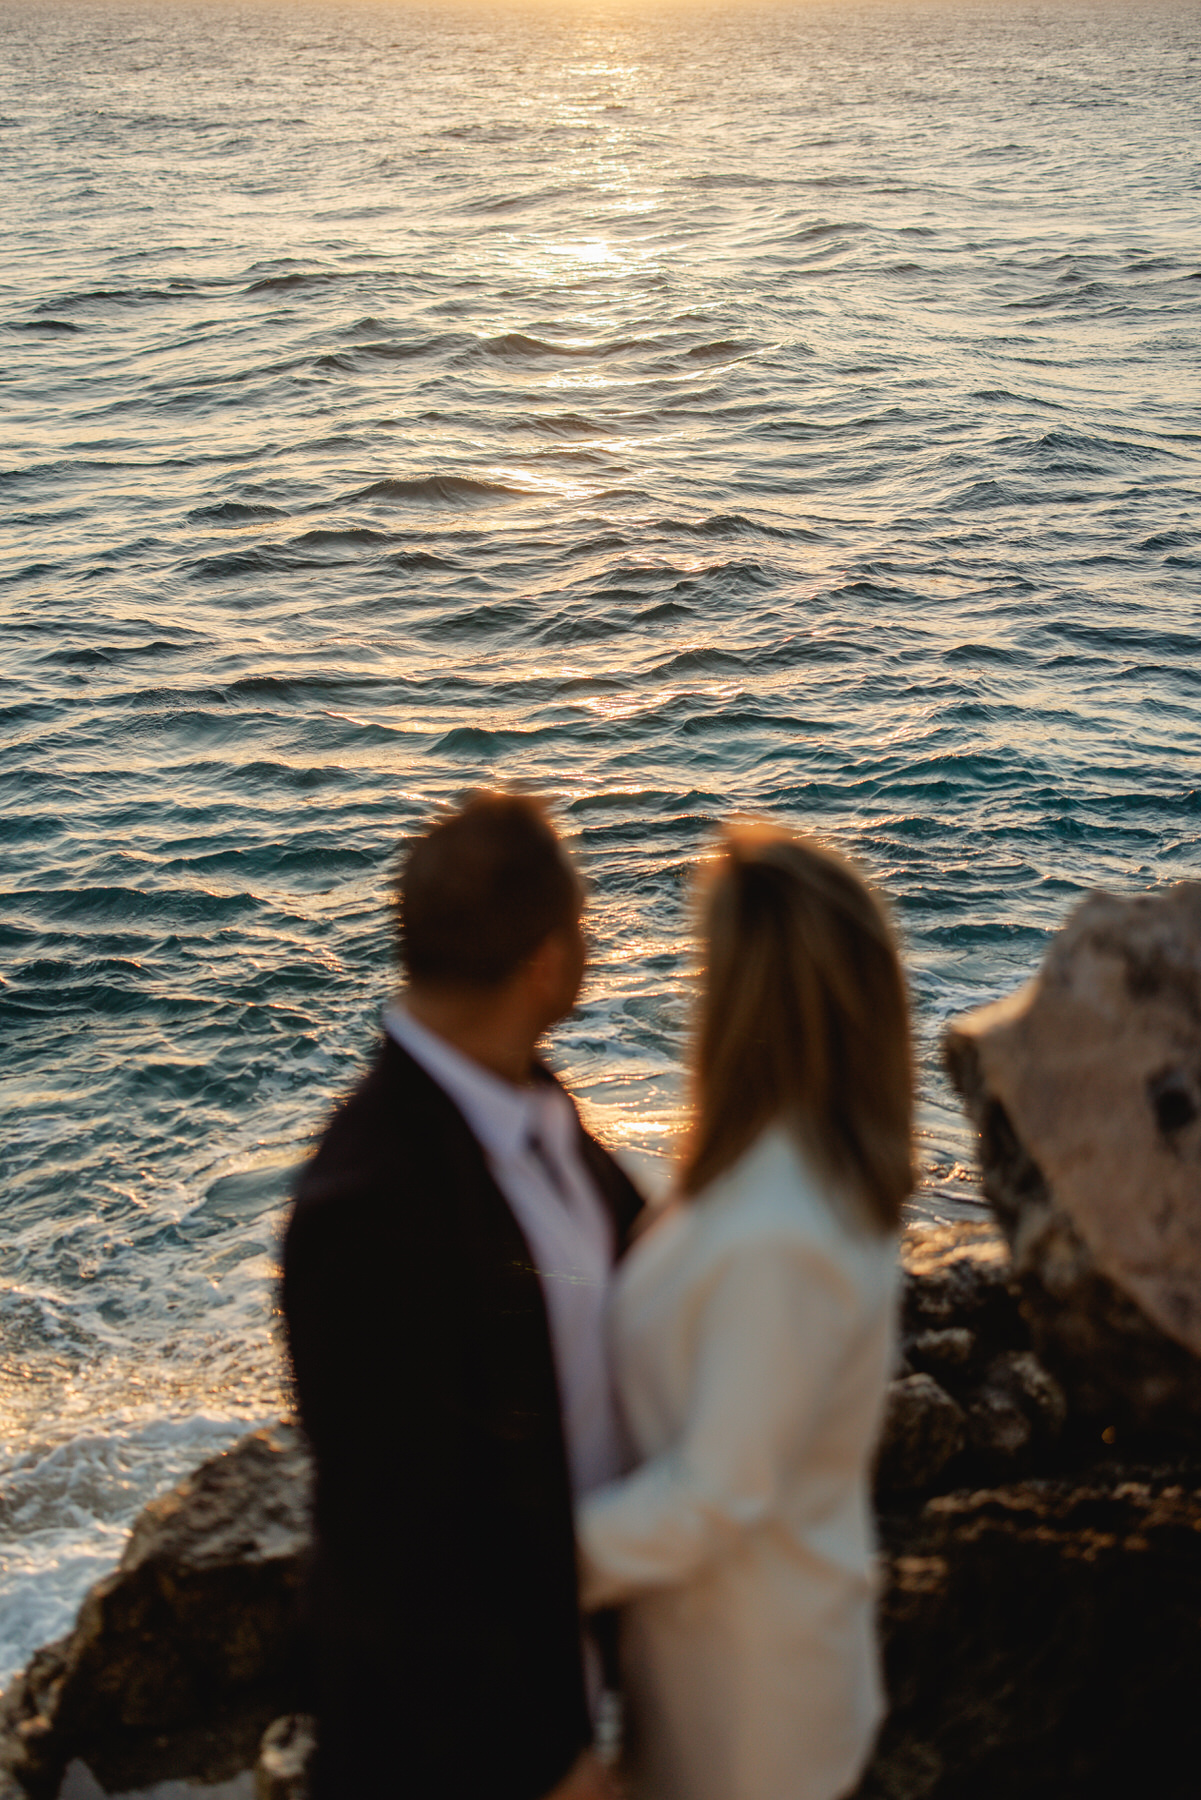 Romantic sunset engagement photo on Isla Mujeres, with the couple standing hand in hand